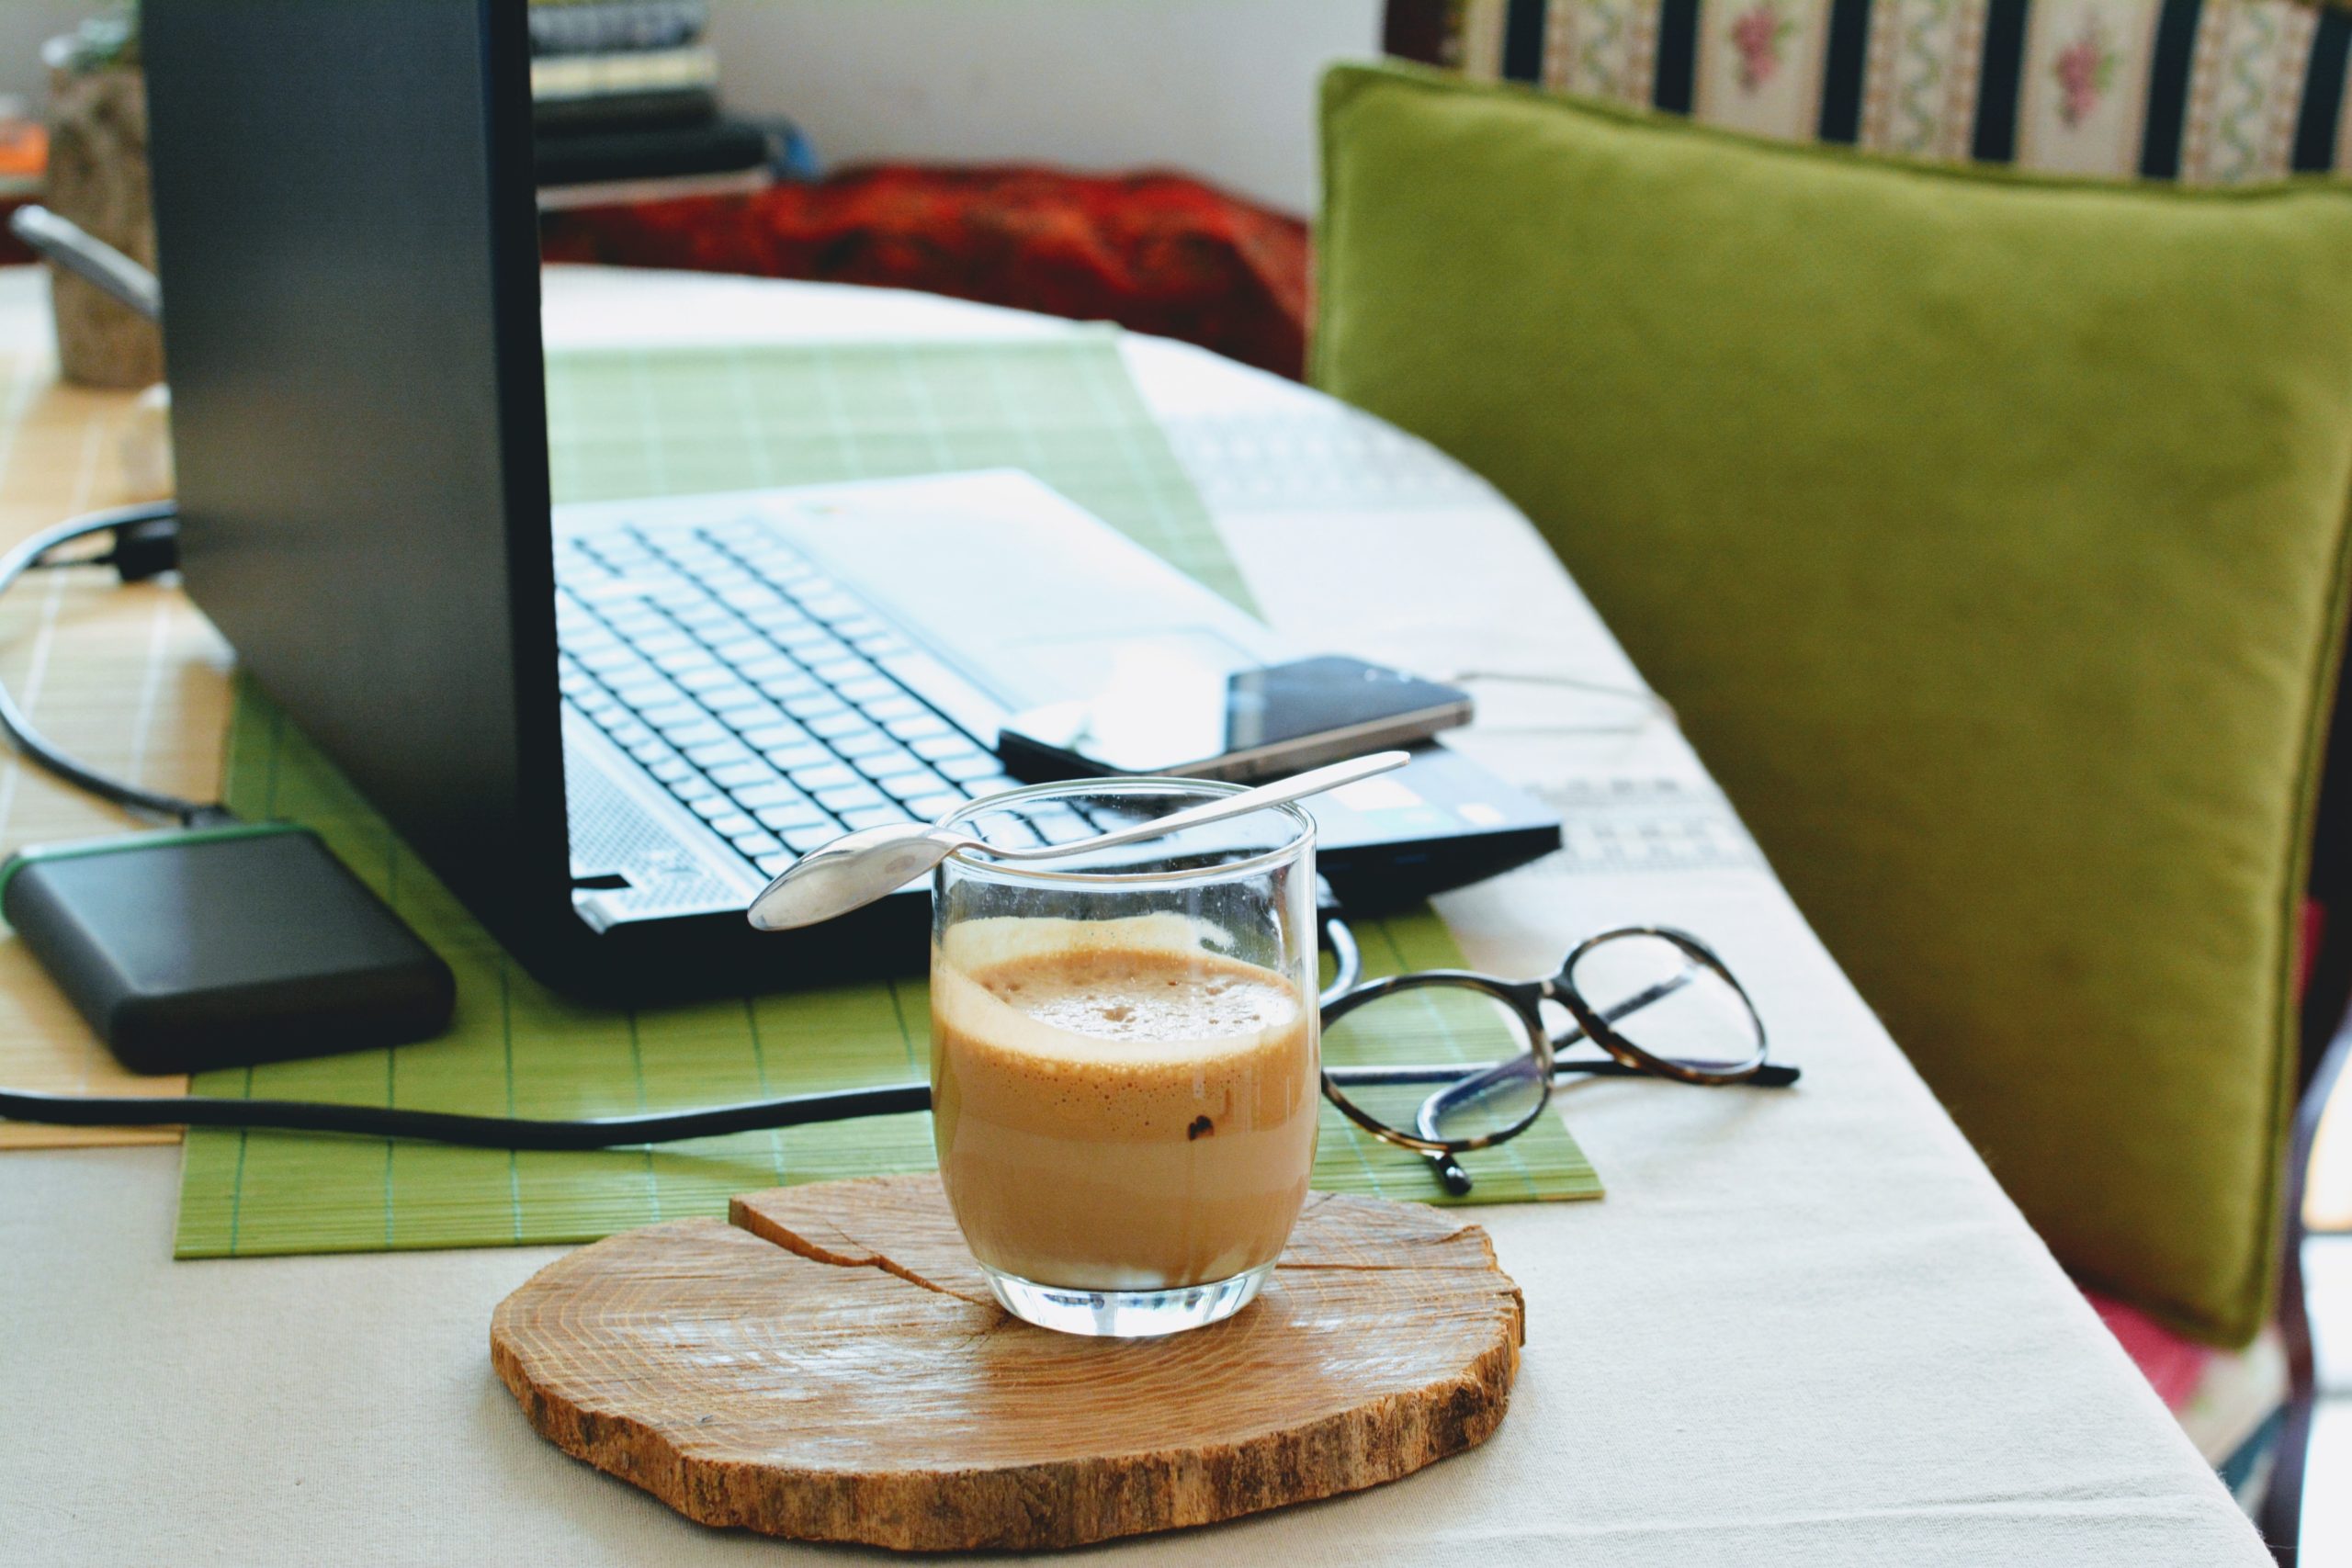 computer, cup of coffee, glasses, on a desk